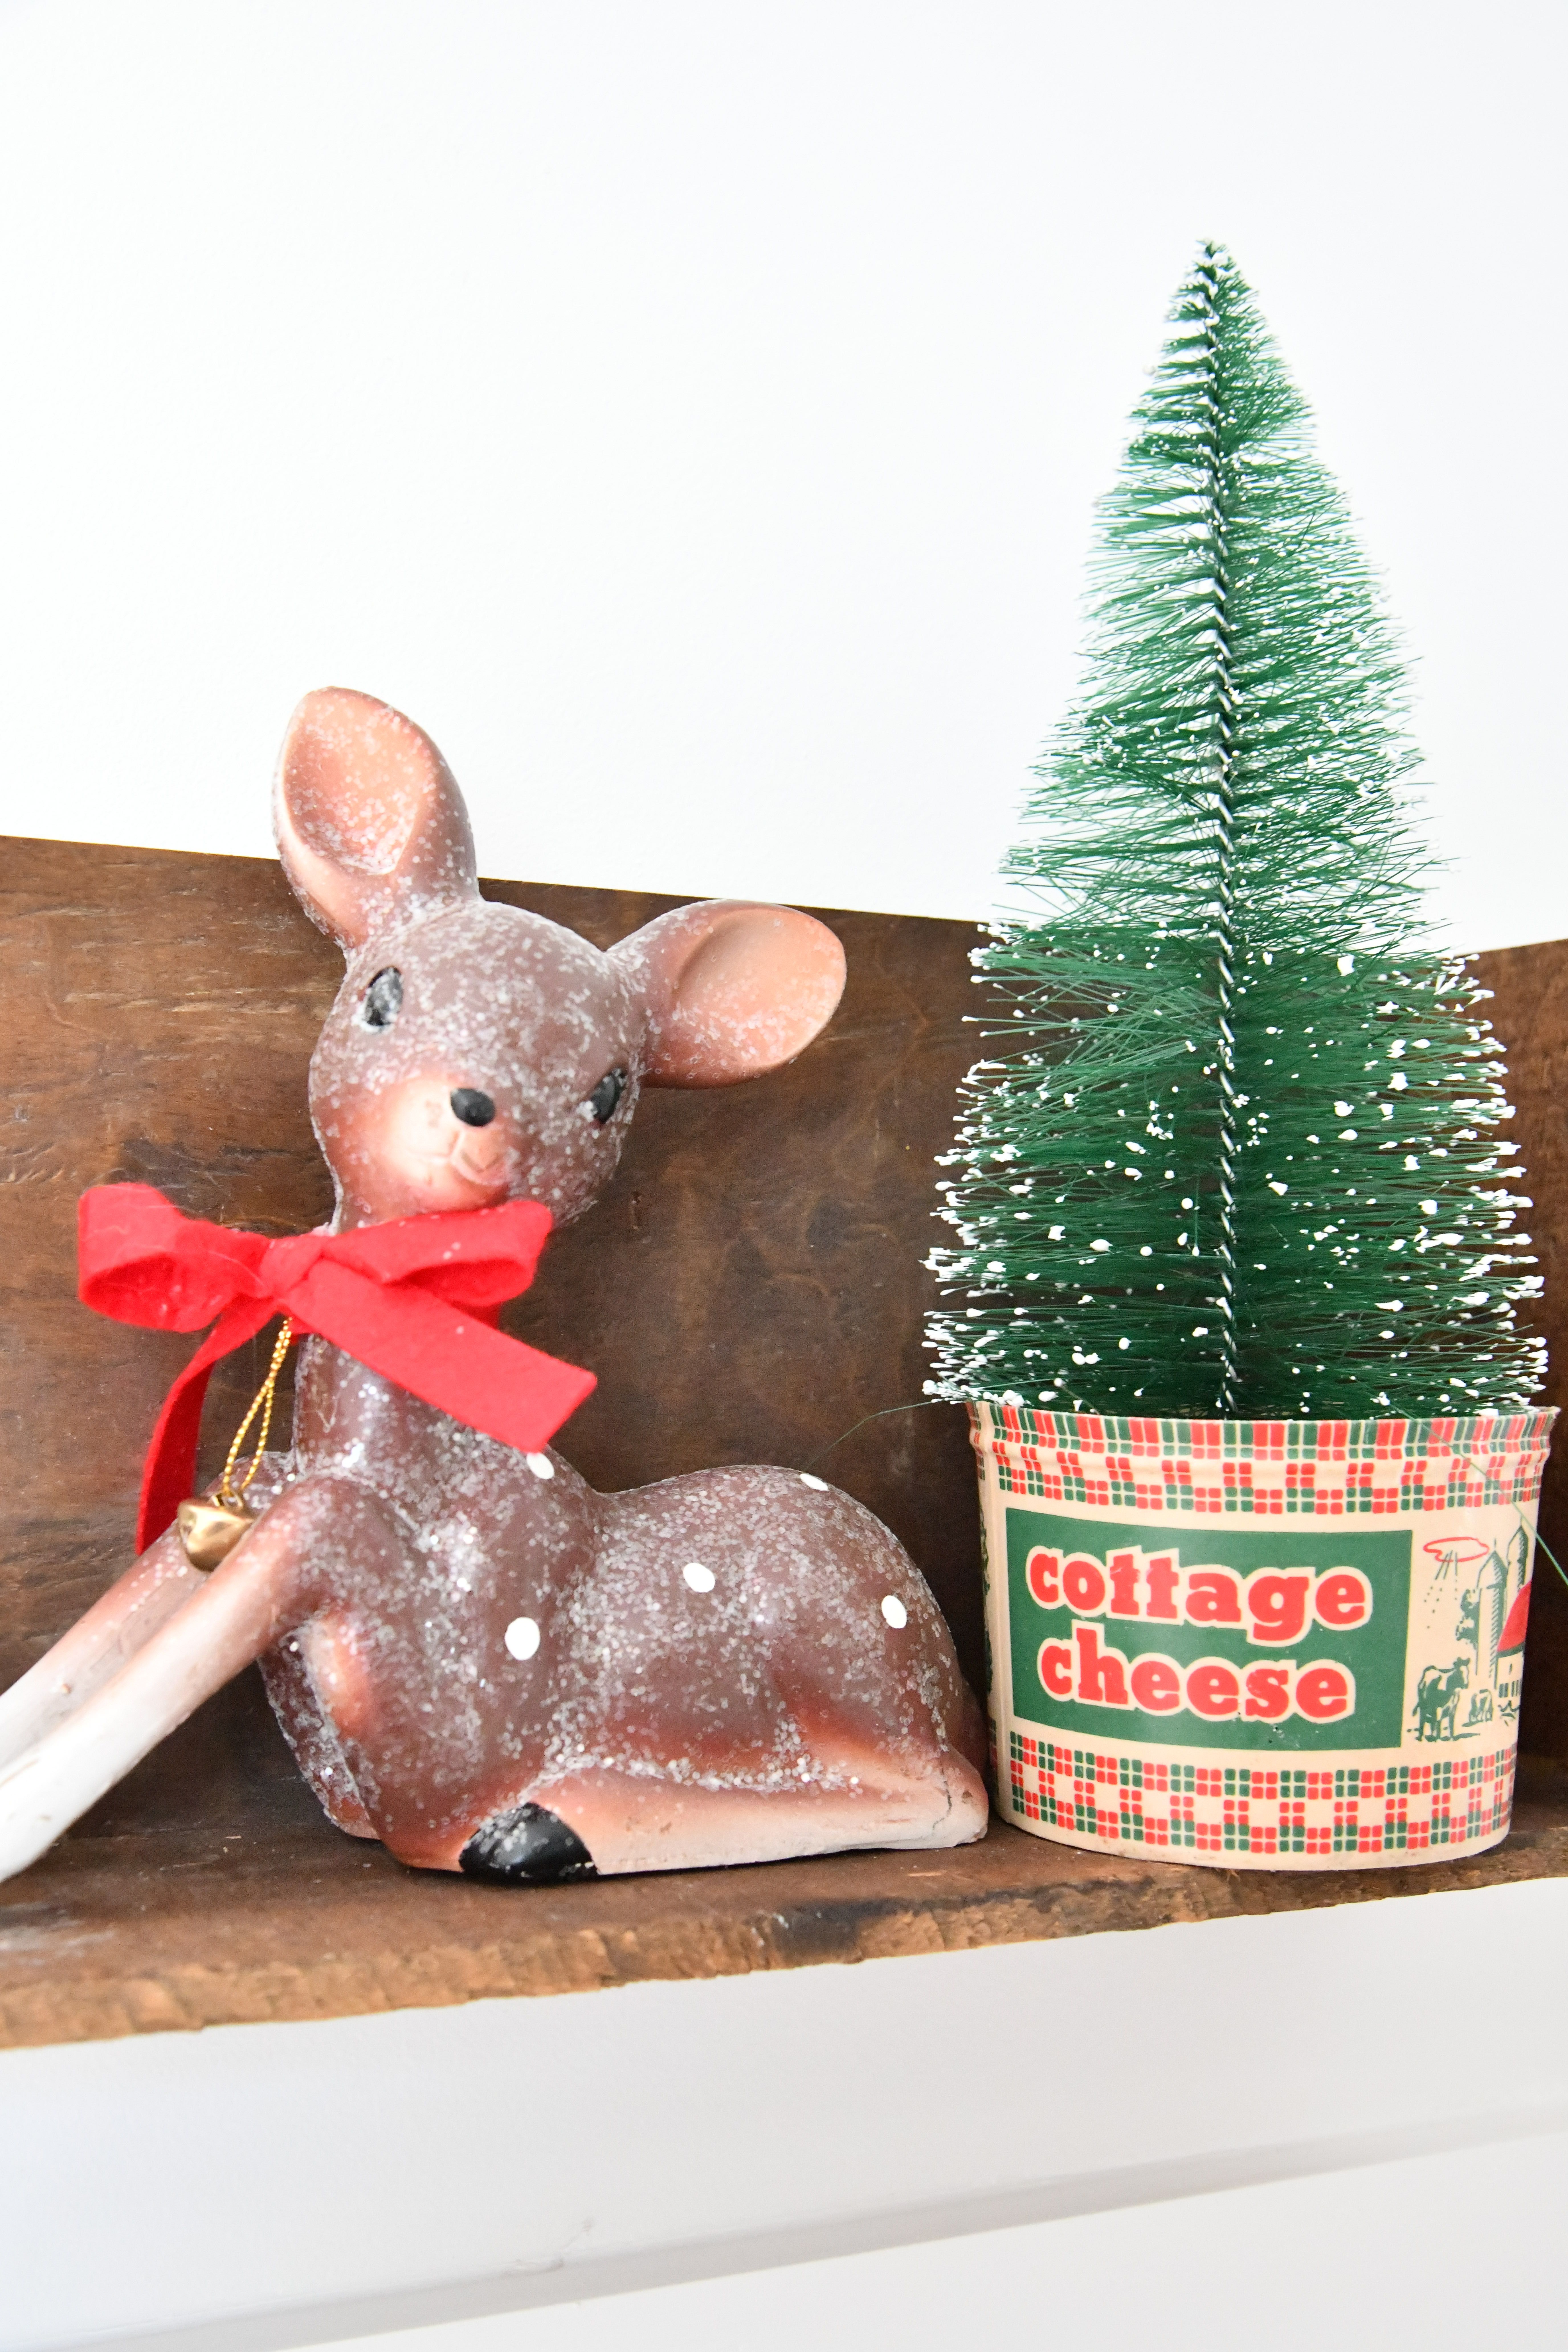 Vintage Christmas Tree Stands Mini Tree in vintage cottage cheese container with deer on shelf 